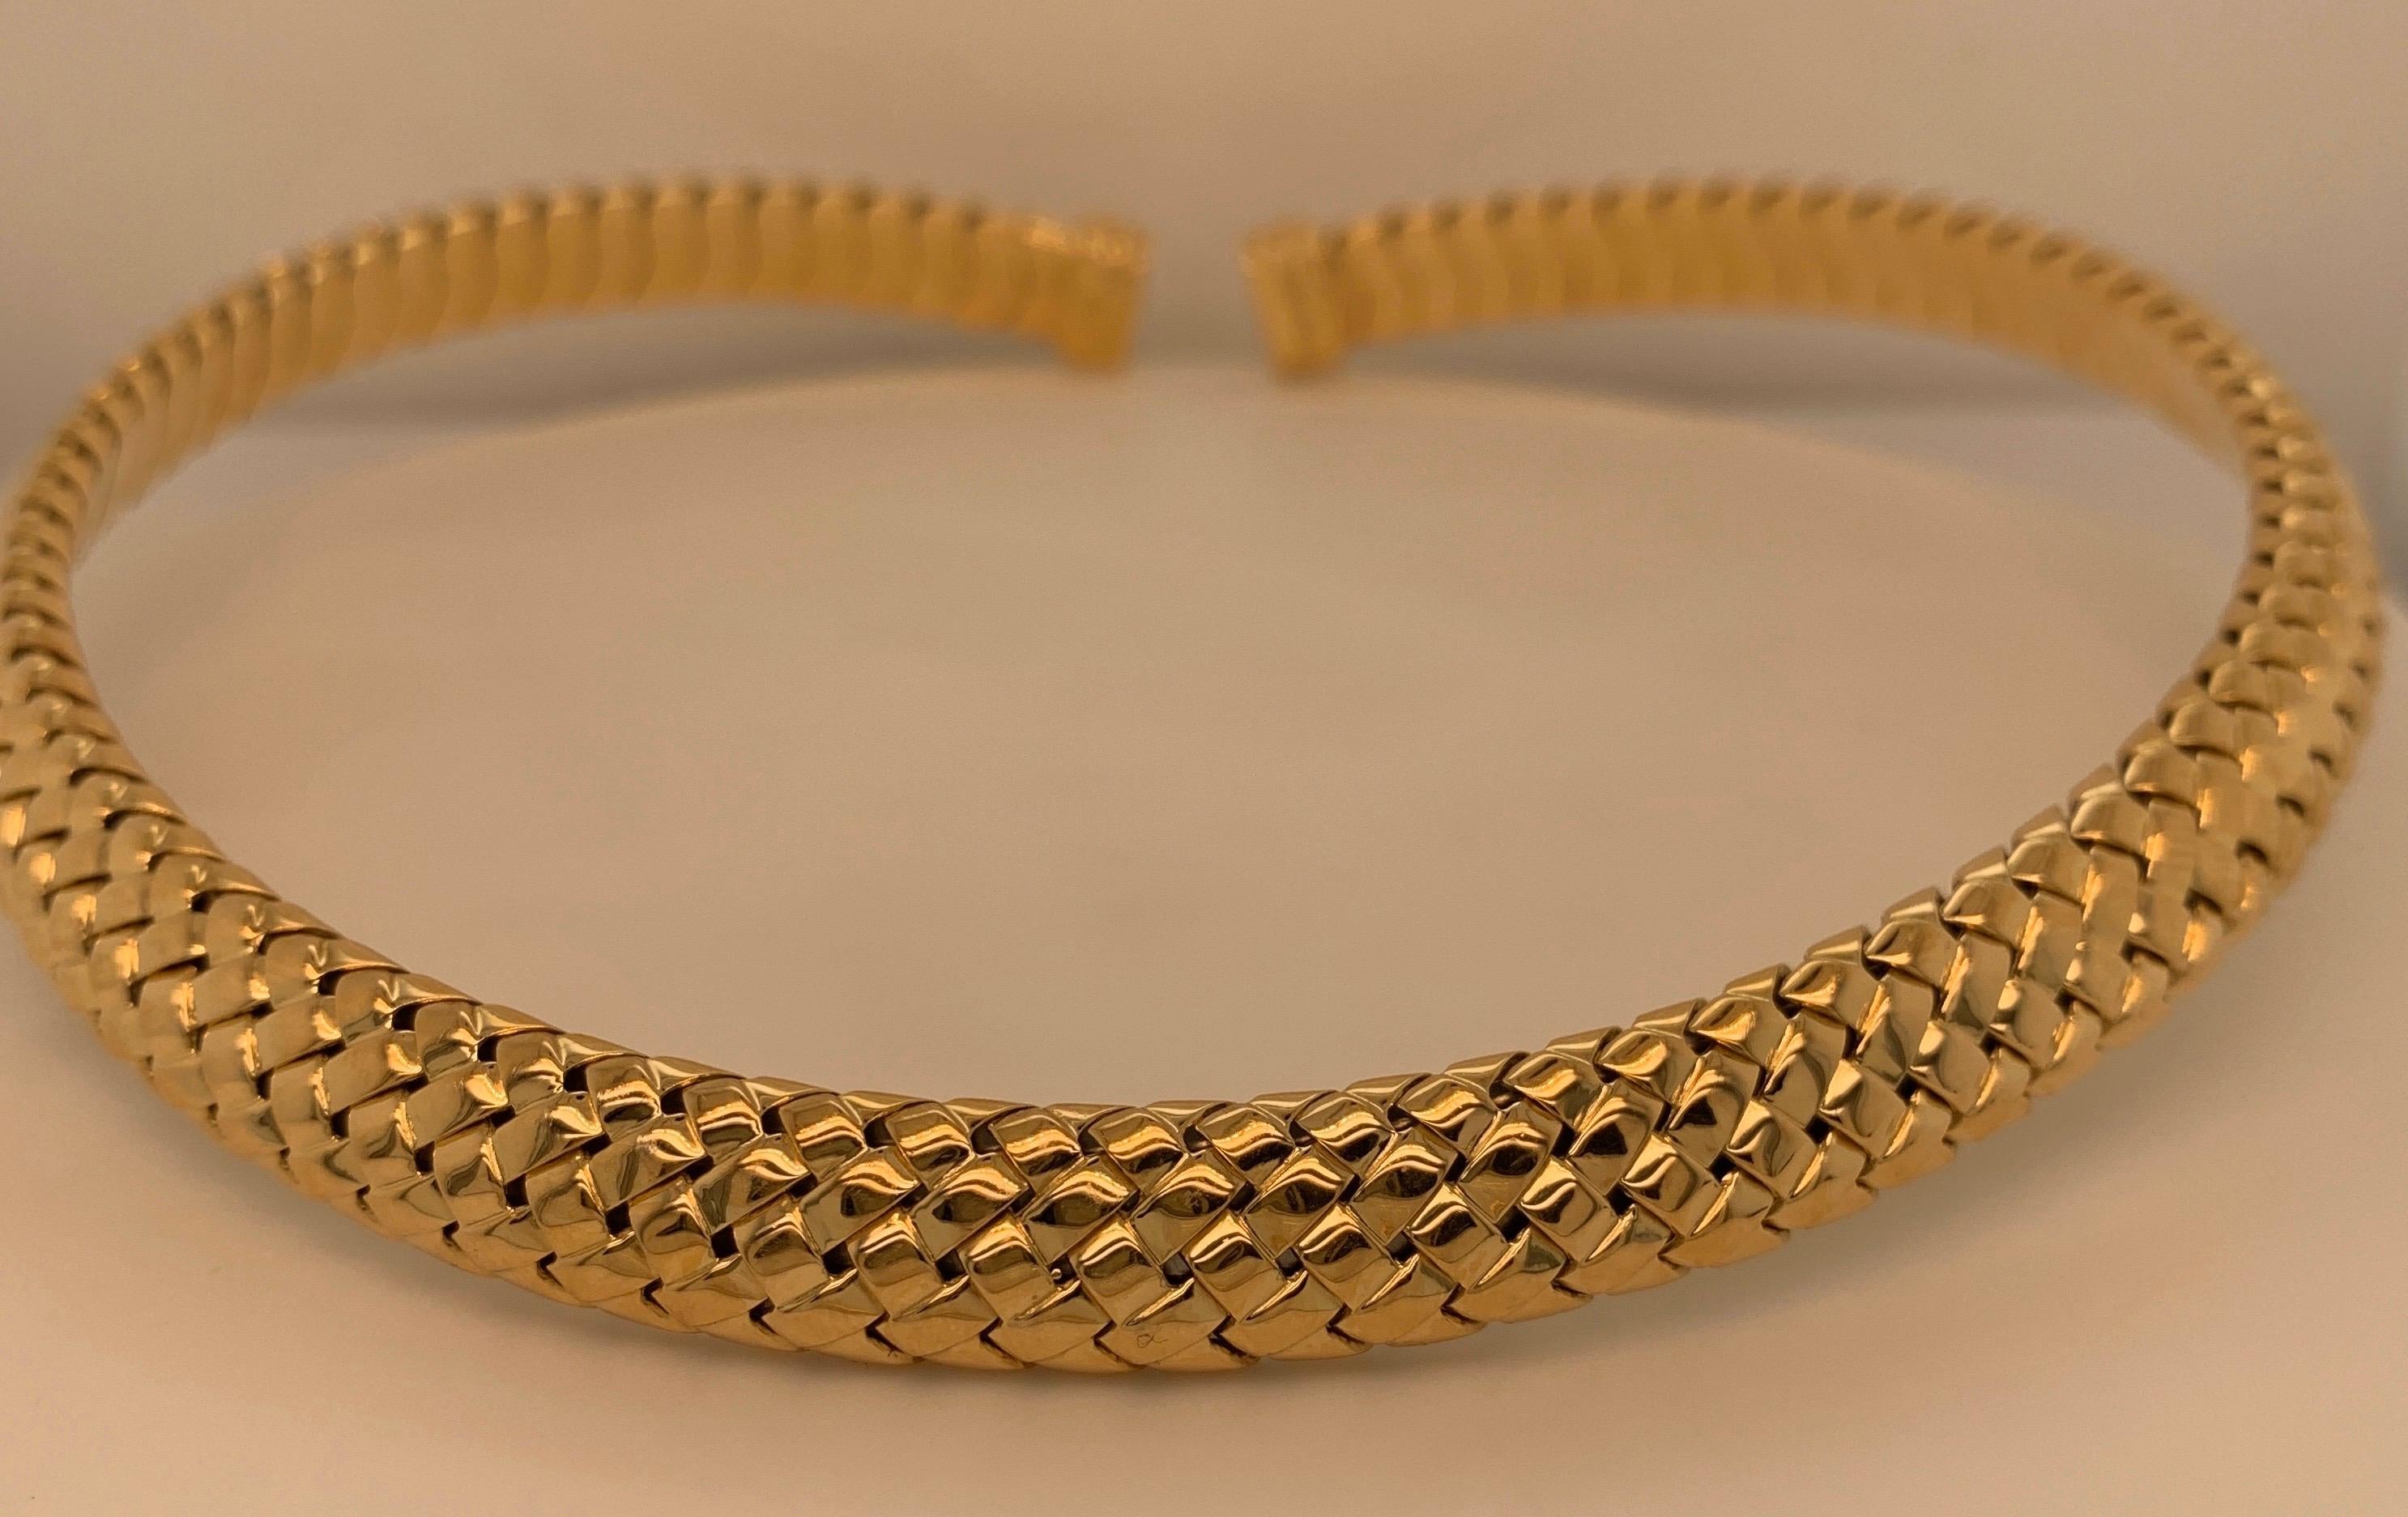 Vintage Tiffany & Co. Vannerie Torque choker necklace.
This timelessly elegant choker necklace crafted in 18K yellow Gold features an interwoven basket weave ‏design.This beautiful piece has a wire like flexibility with capped ends to fit around the